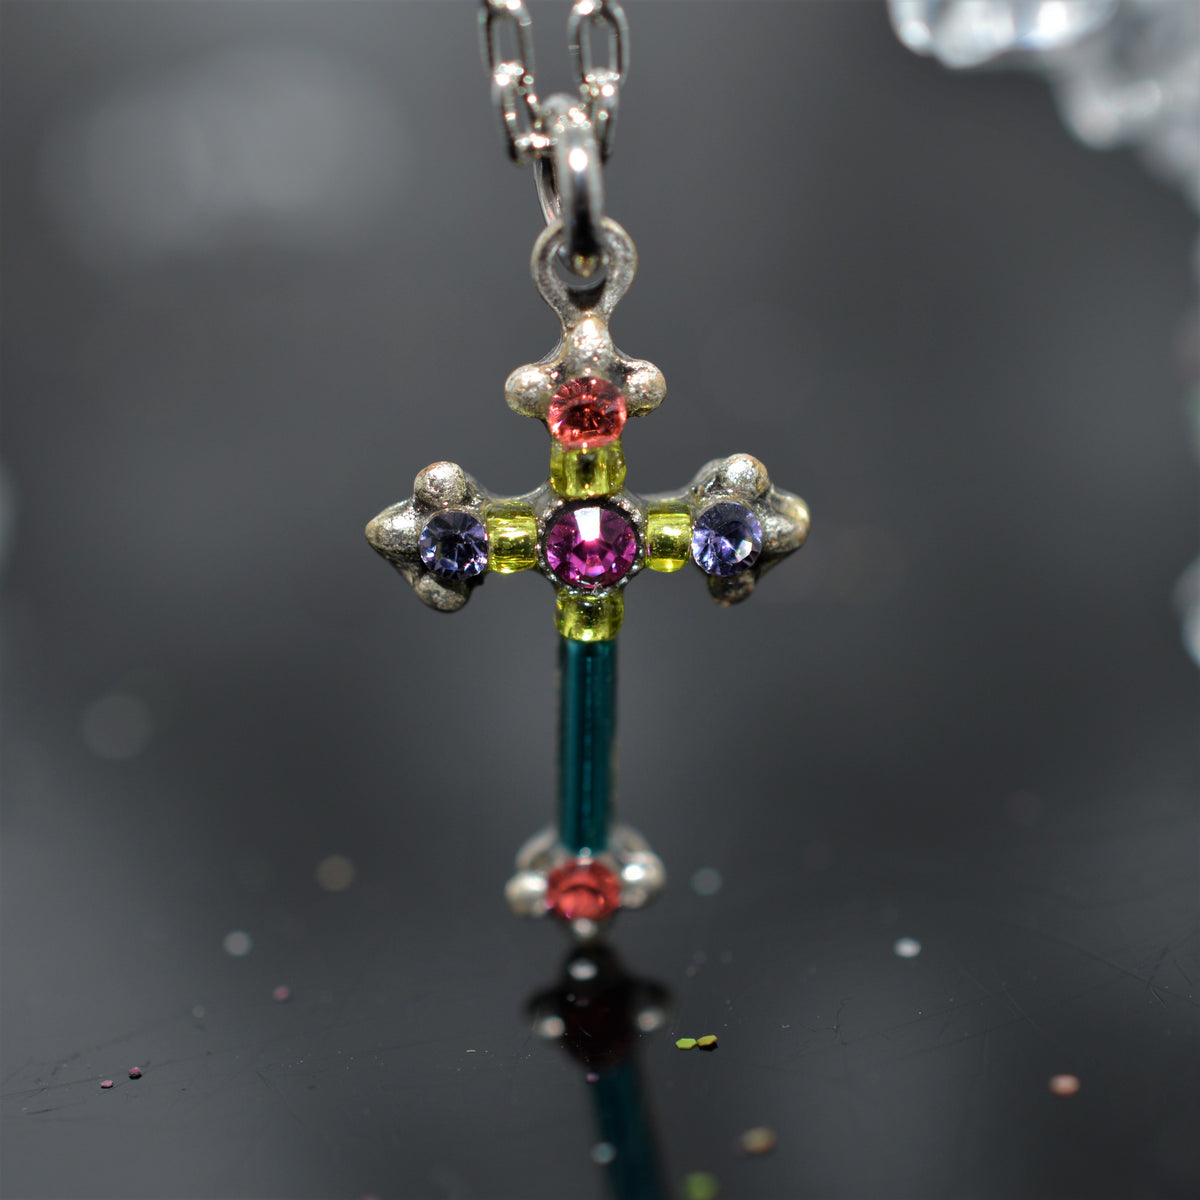 Antique Silver Plated Petite Cross Pendant With Multicolor Crystals by Firefly